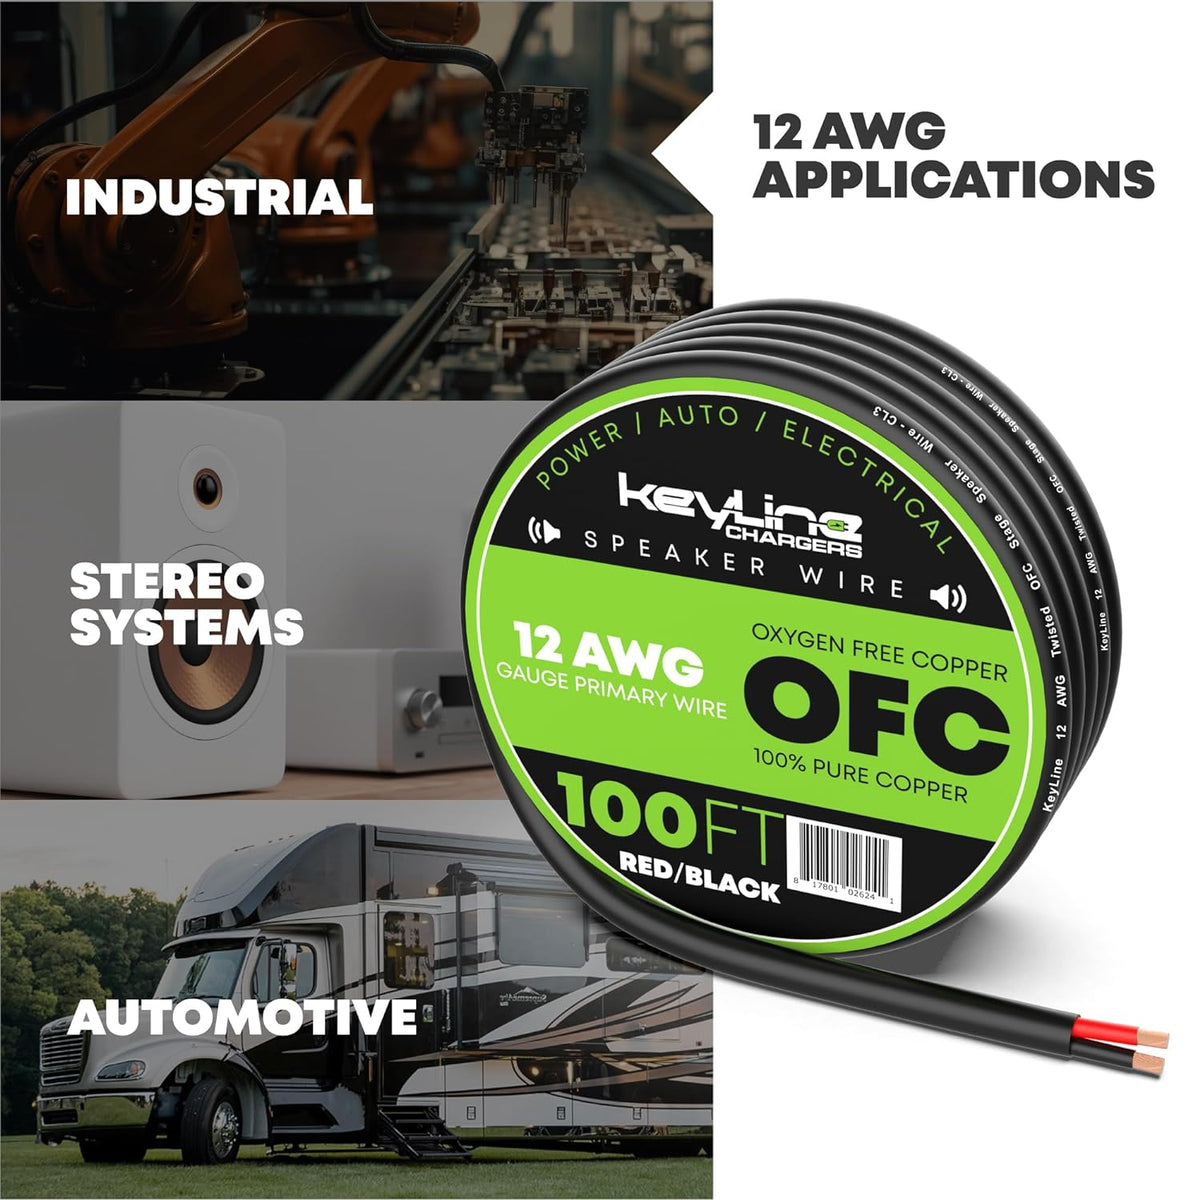 12 Gauge Speaker Wire - 100 Feet Black| 12-2 AWG Gauge - Outdoor Speaker Wire, CL3 CL2 Rated for in Ground Burial & in Wall / 2 Conductors - Marine Speaker Wire OFC Oxygen-Free Copper, Black 100ft